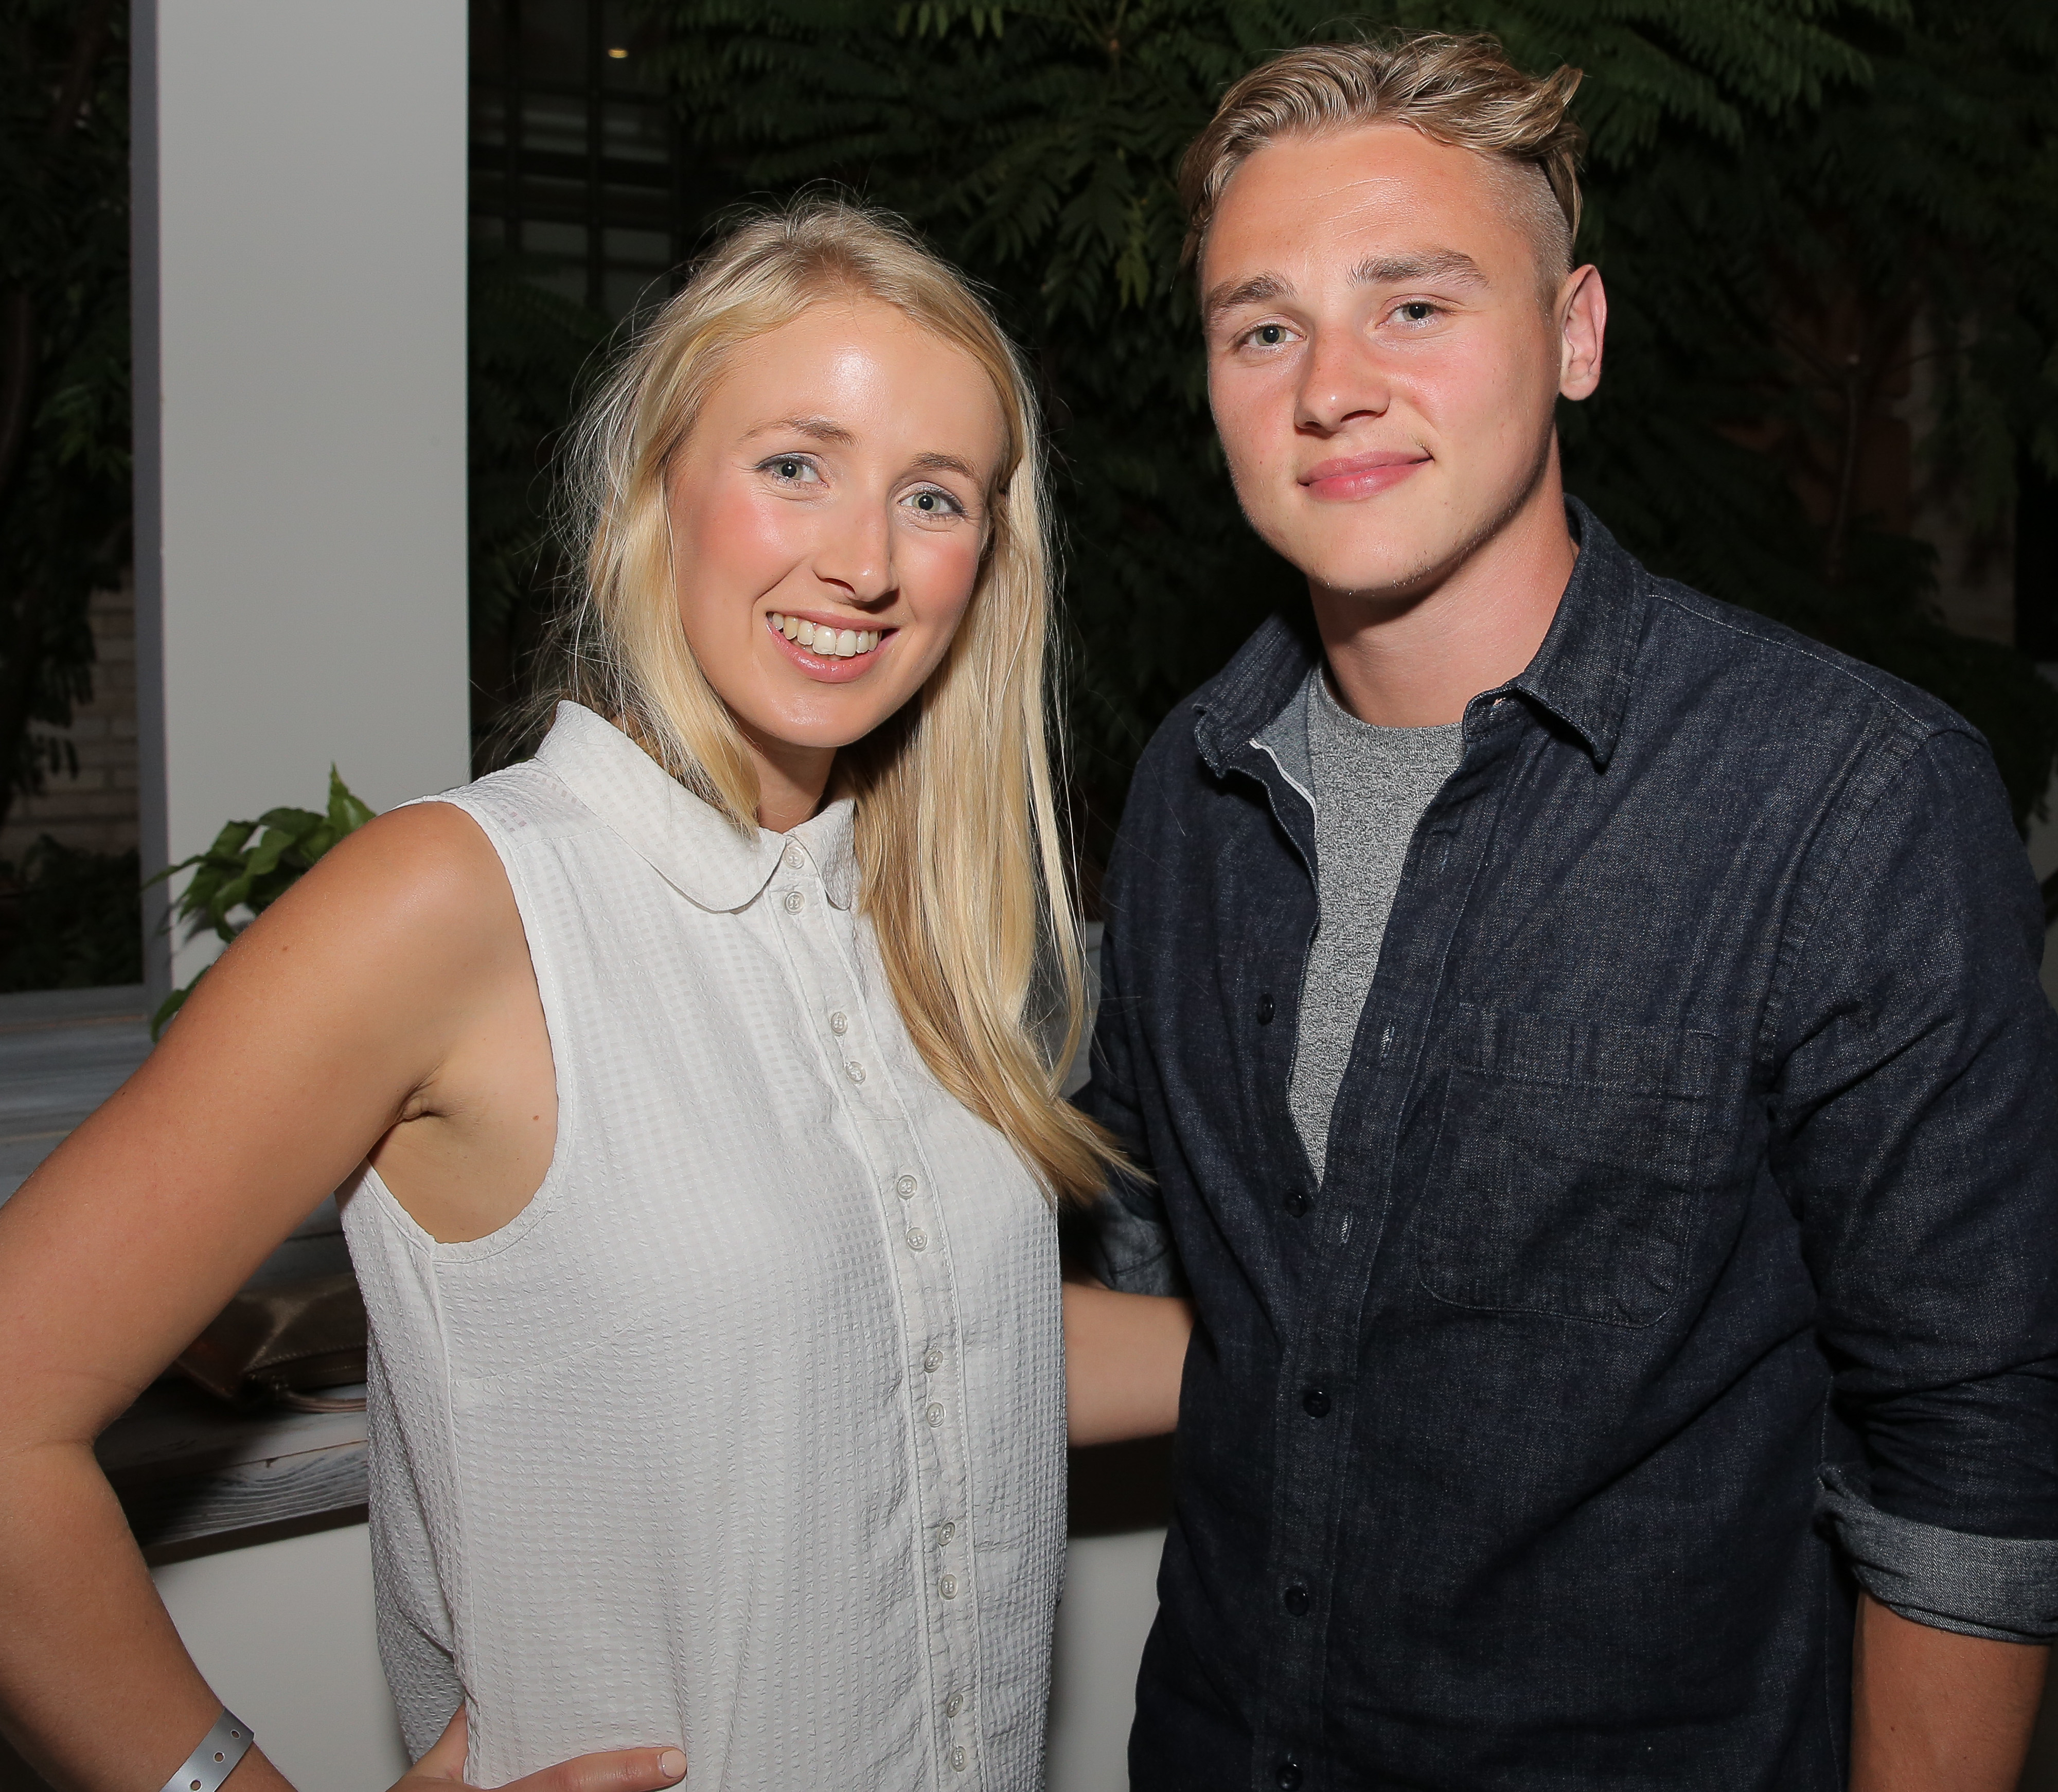 Katriona Perrett and Ben Hardy on September 24, 2015, in Los Angeles. | Source: Getty Images